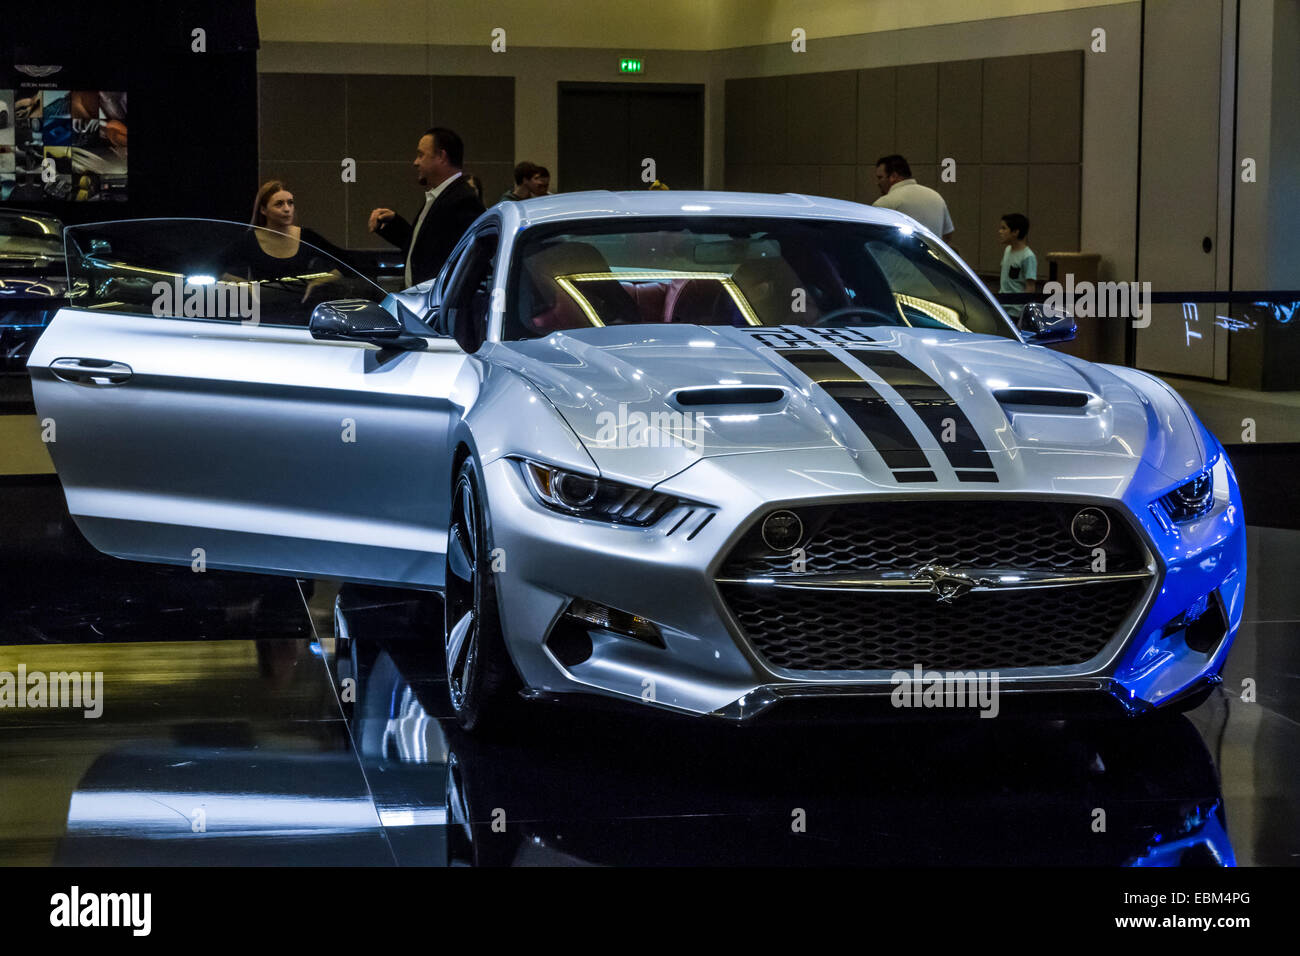 The 725 HP Galpin Ford re-skinned Ford Mustang designed by Henrik Fisker at the 2014 Los Angeles Auto Show Stock Photo